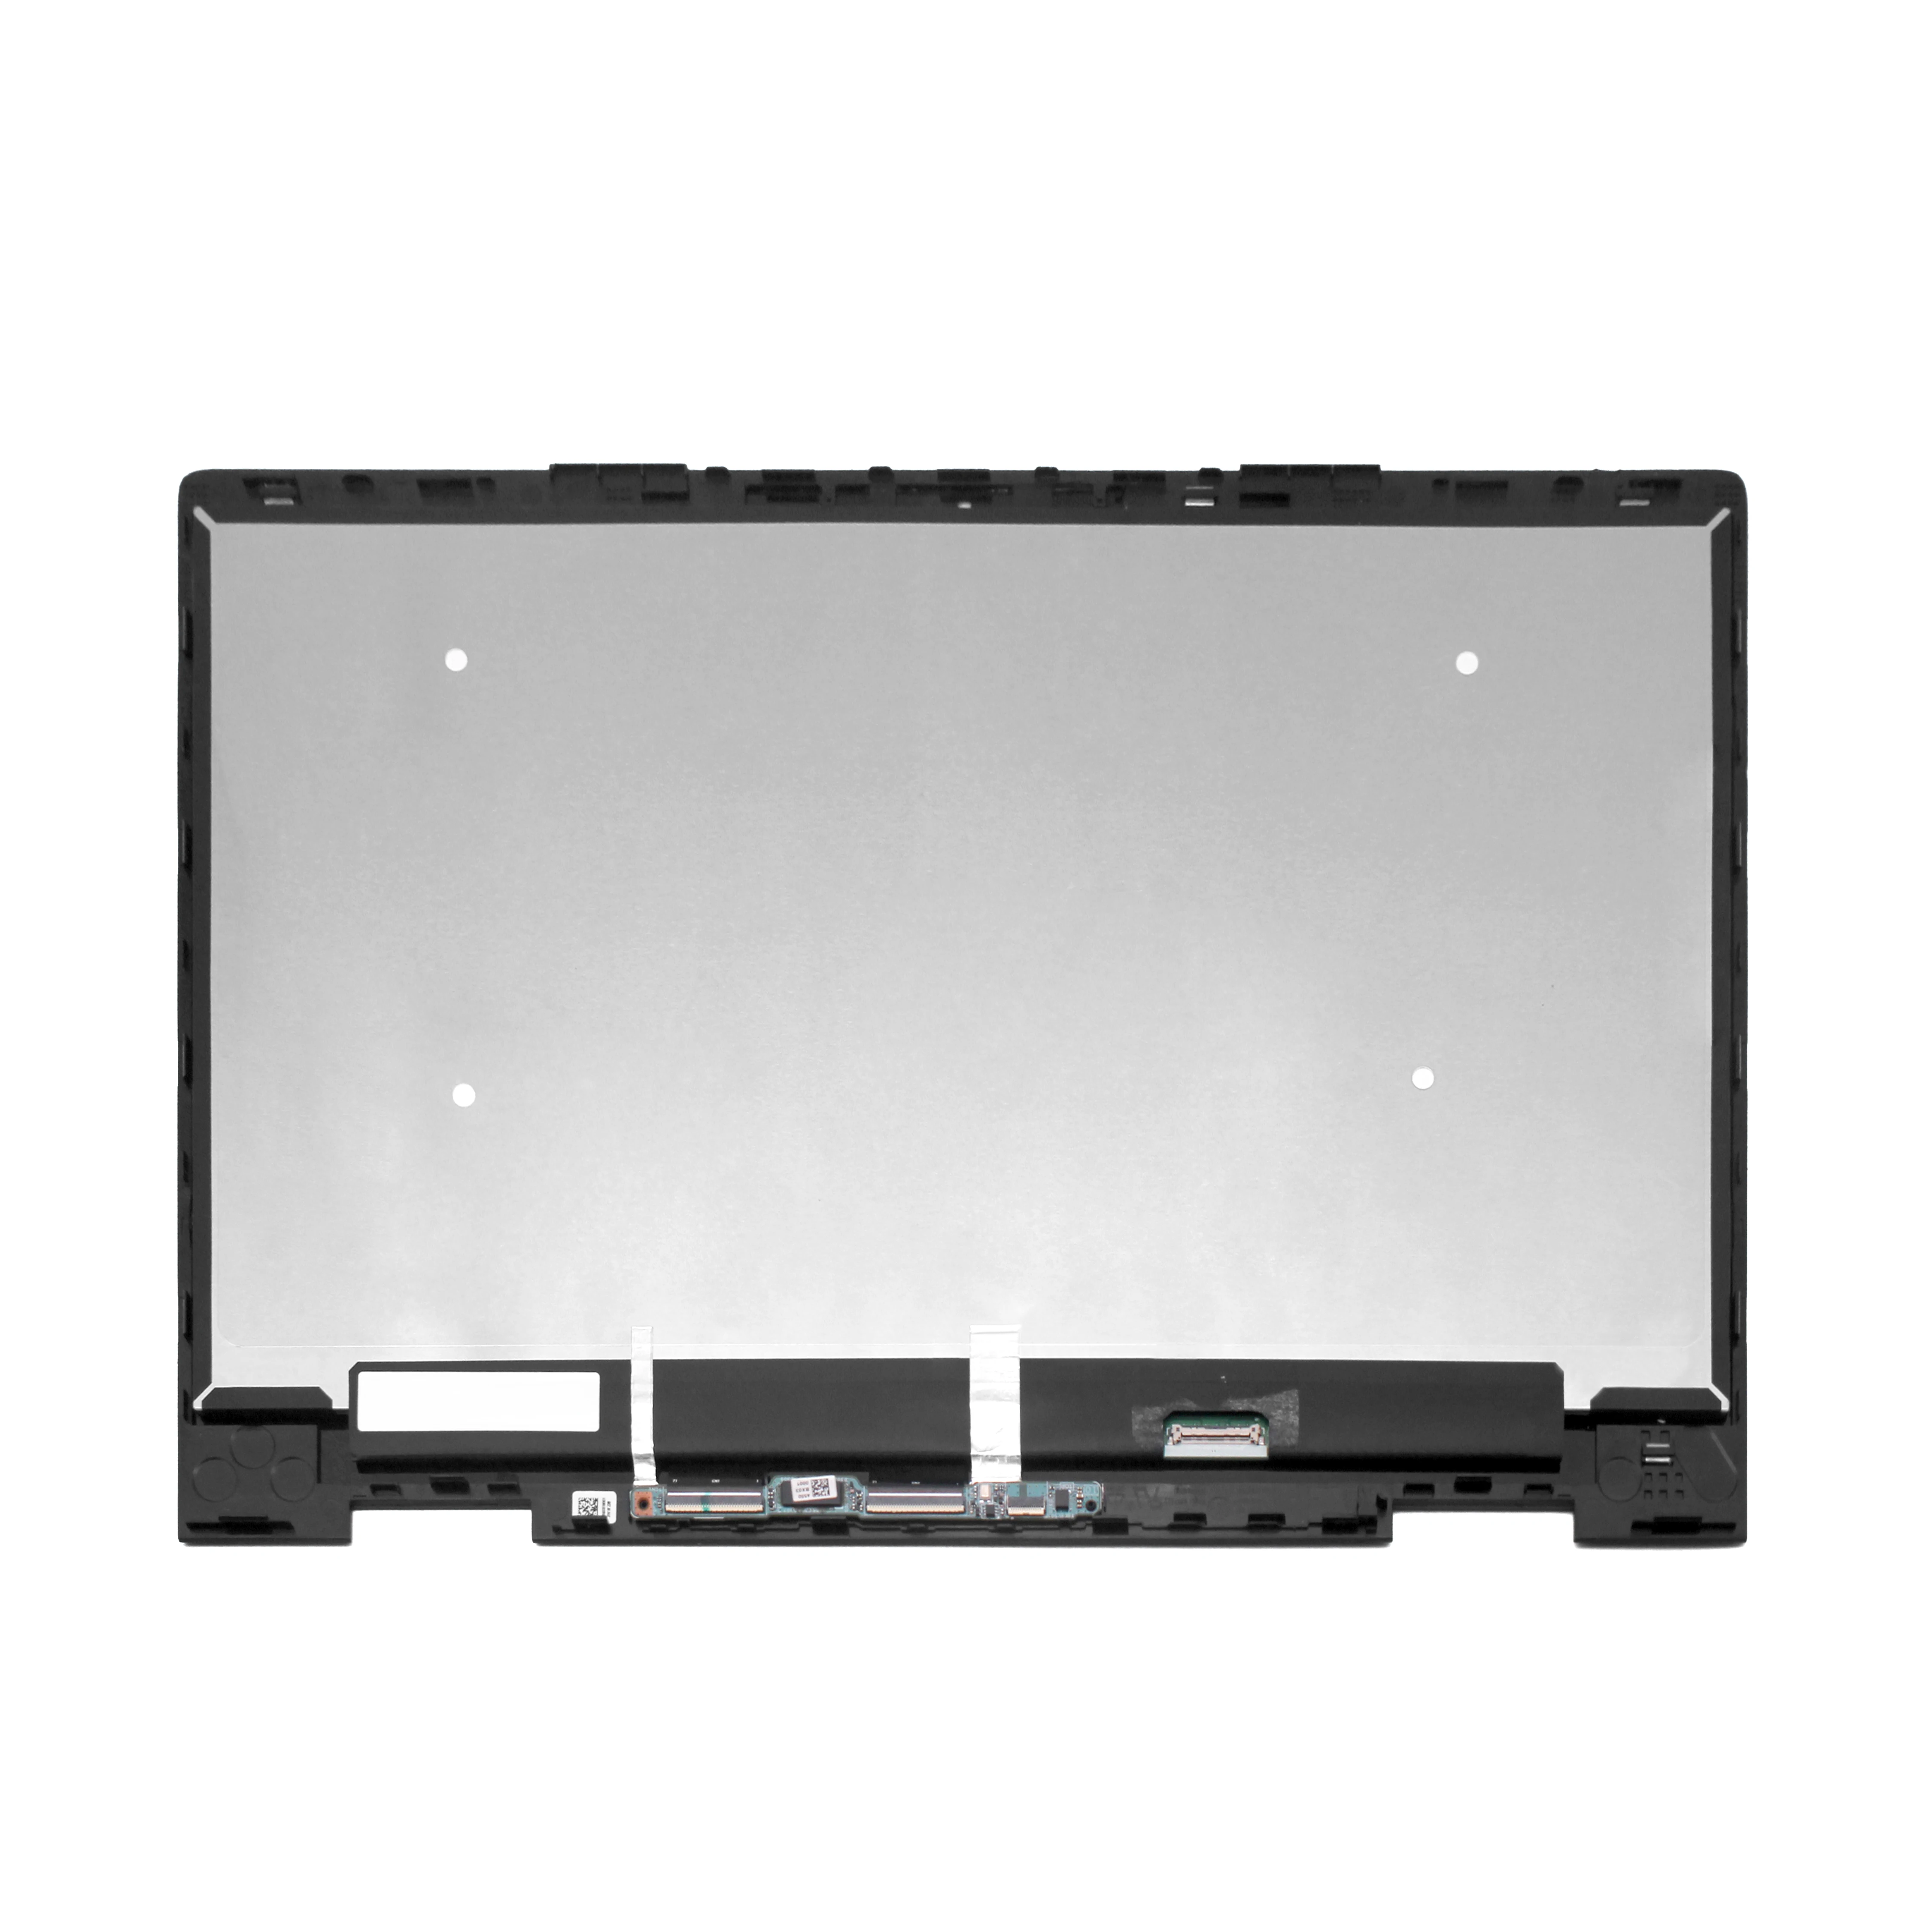 LCD Touch Screen Digitizer Assembly With Bezel For HP Envy x360 15 bp 15 bp000nx 15 bp000ur 15 bp001nc 15 bp001ne 15 bp001nf